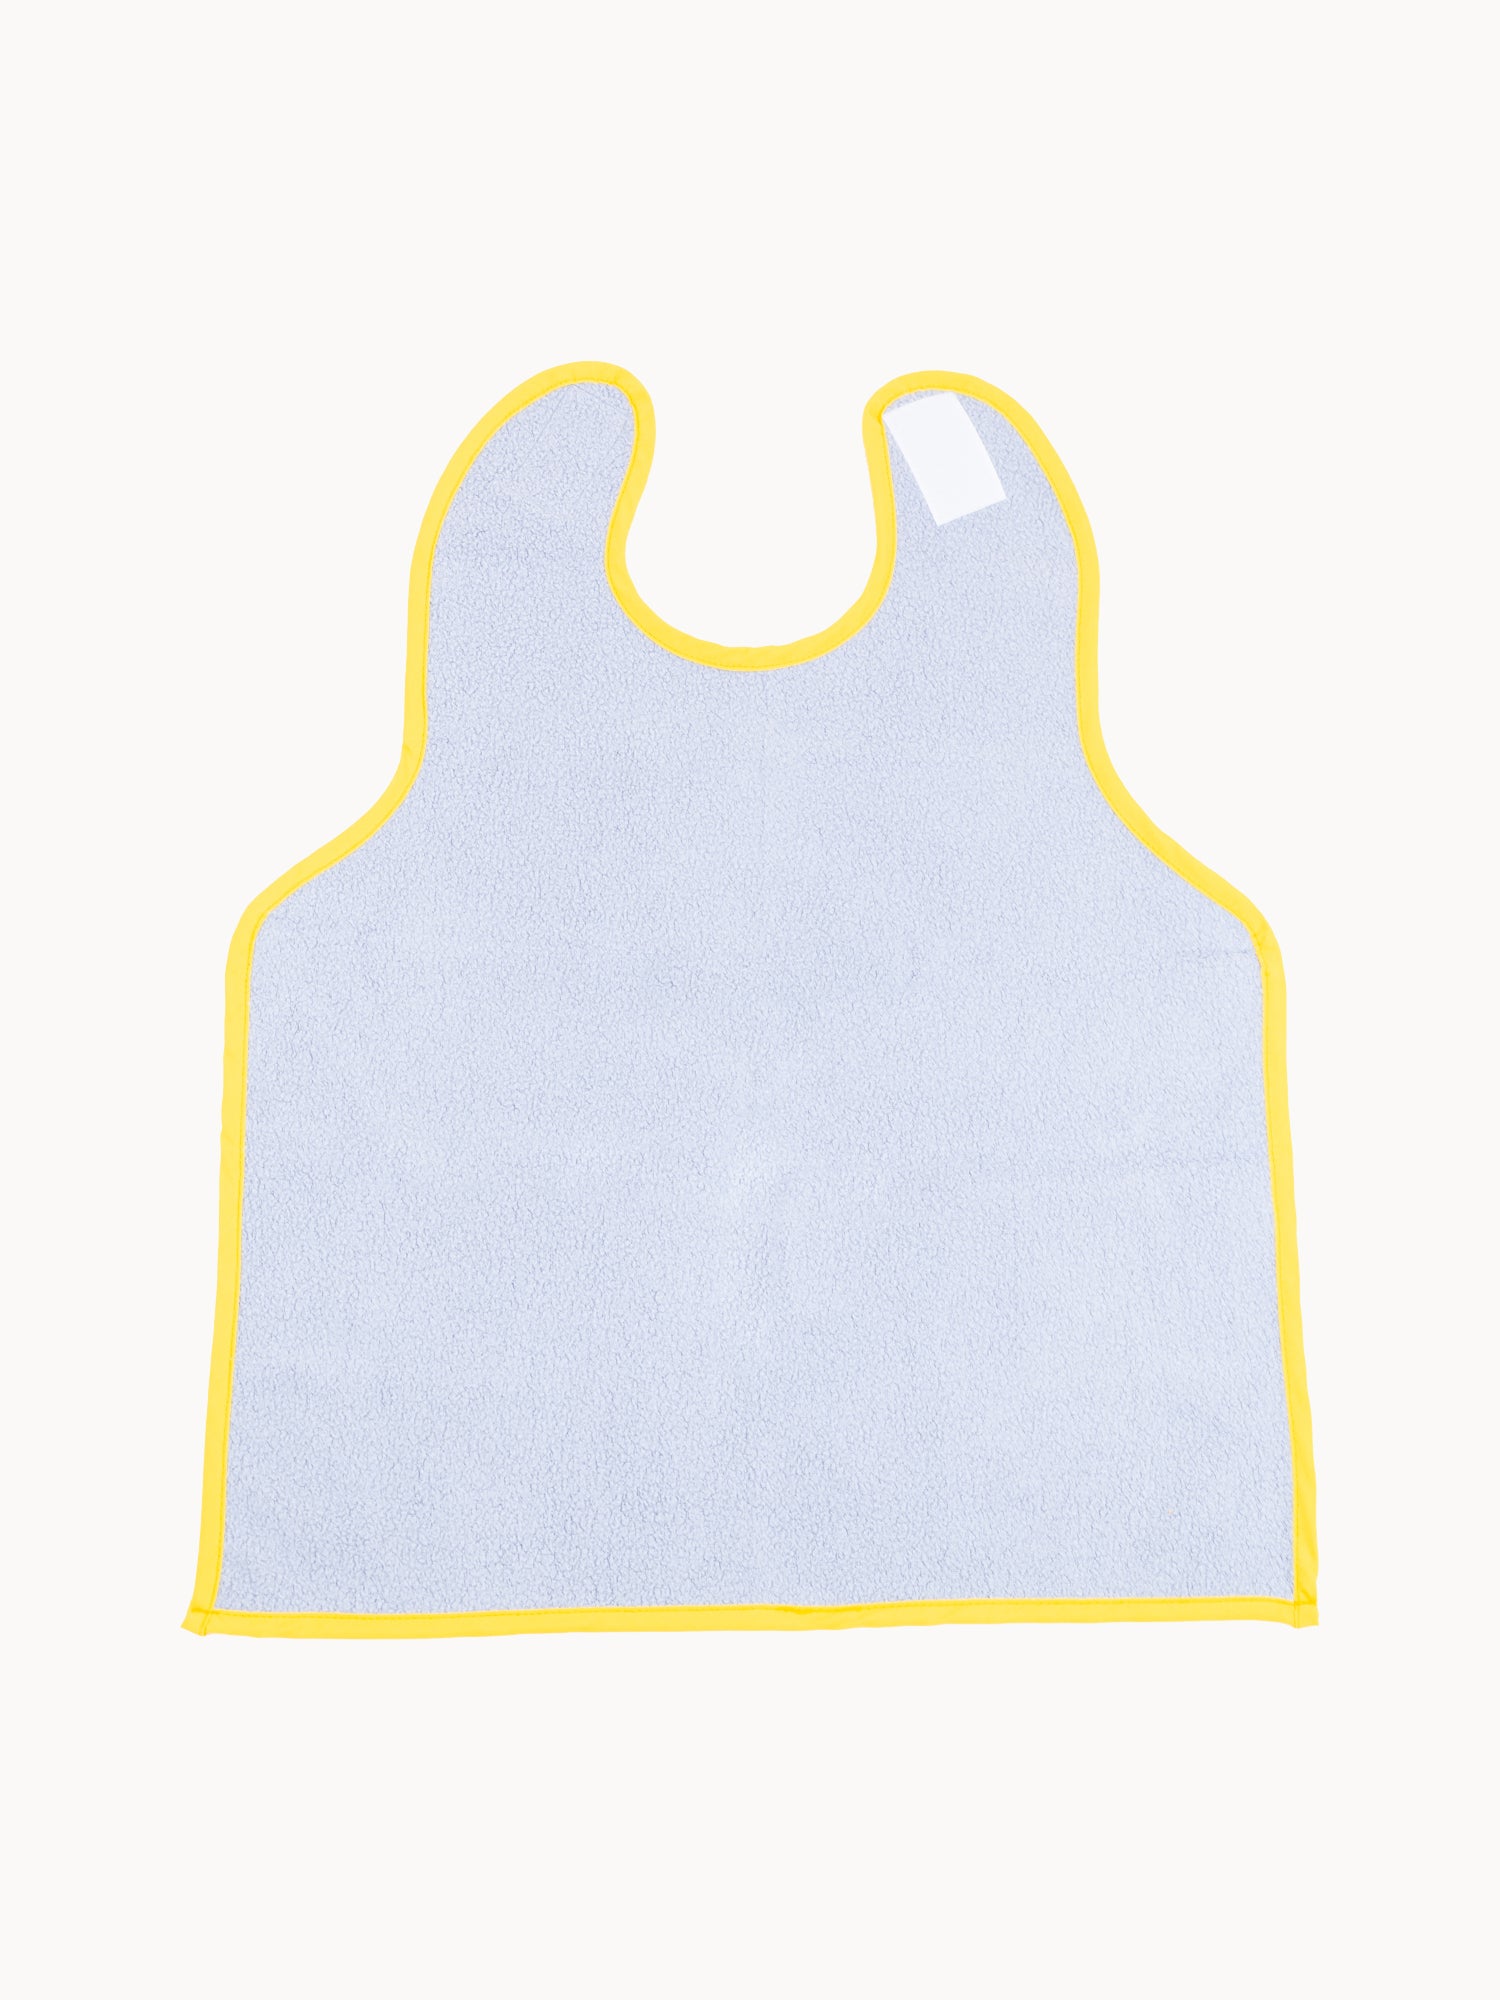 Super-Sized, Safe, Absorbent, Waterproof, Washable Baby Toddler Car Seat Bib in Yellow